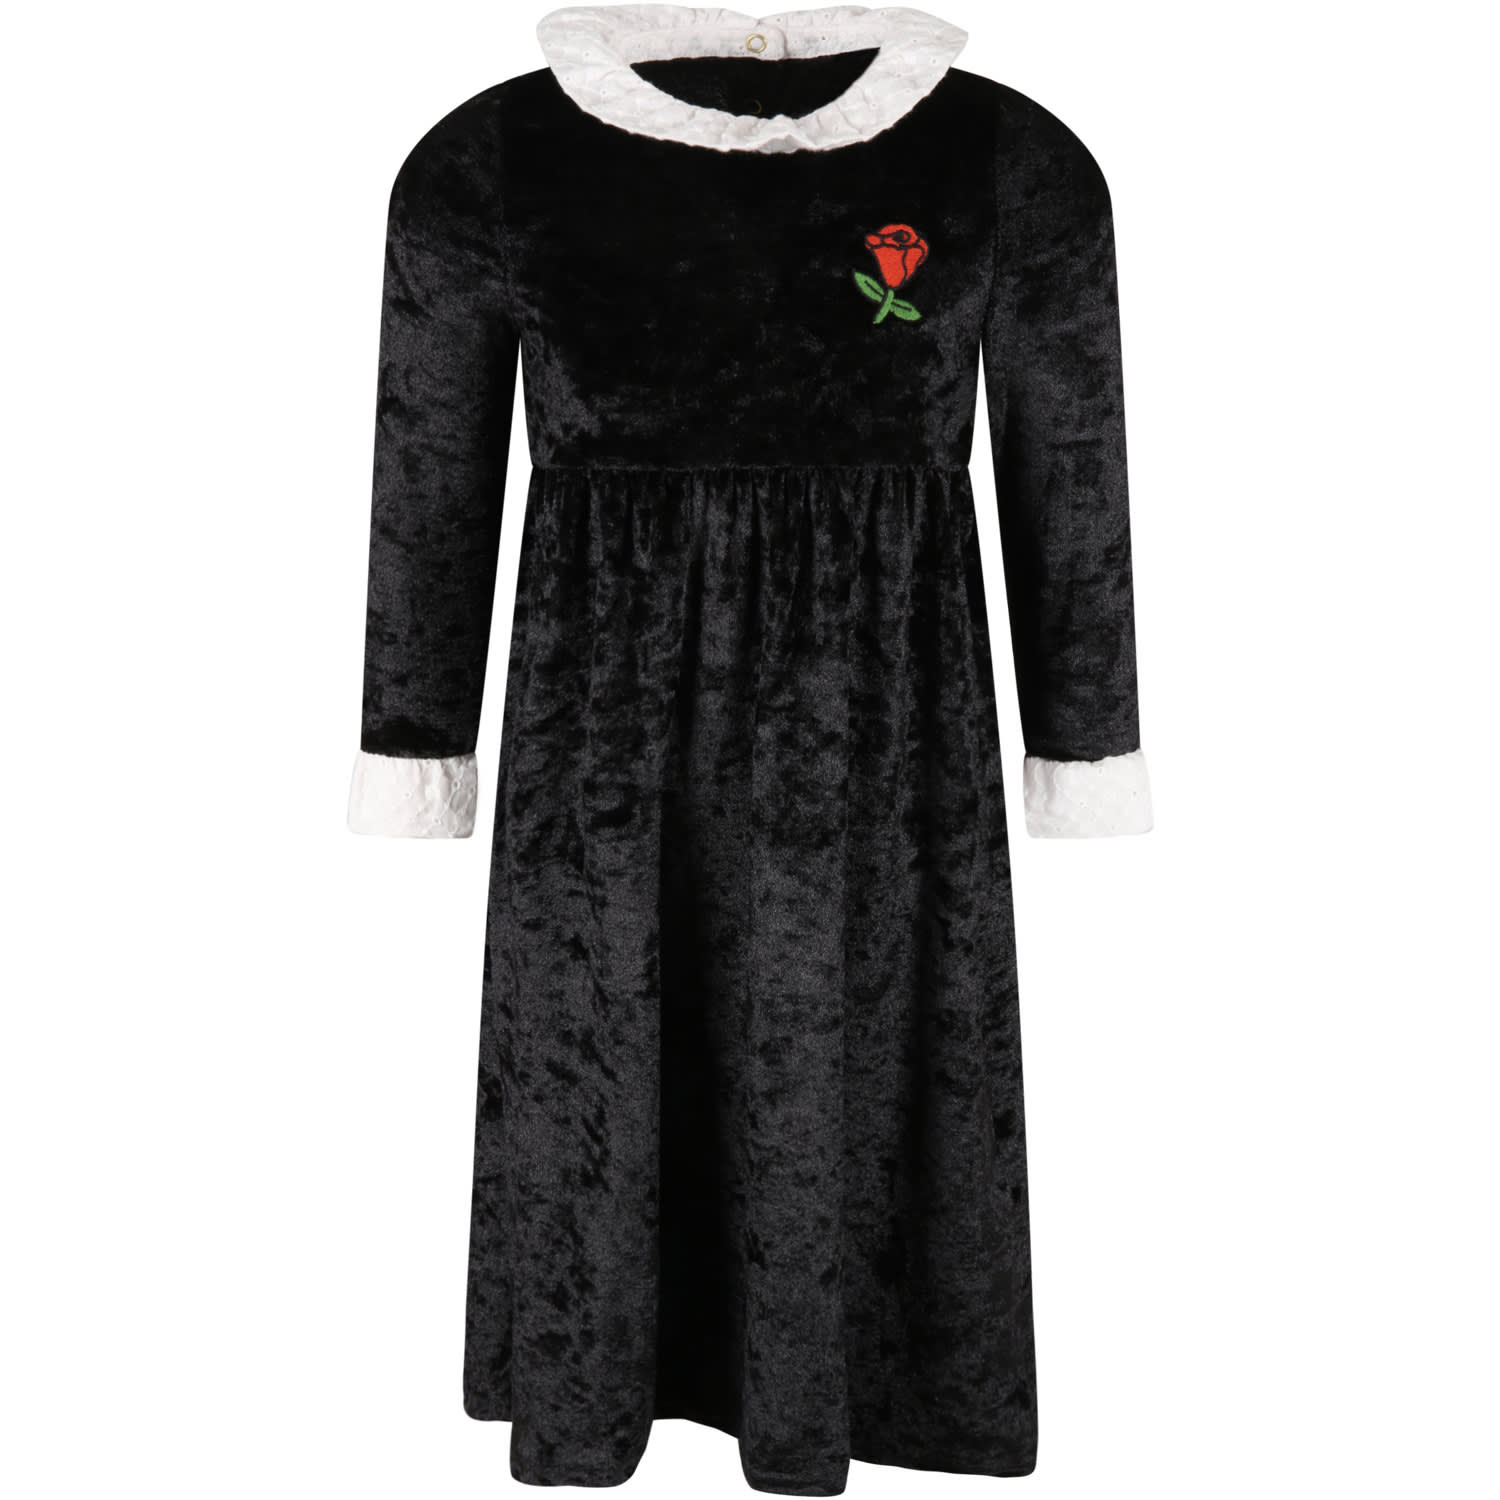 Mini Rodini Black Dress For Girl With Red Rose